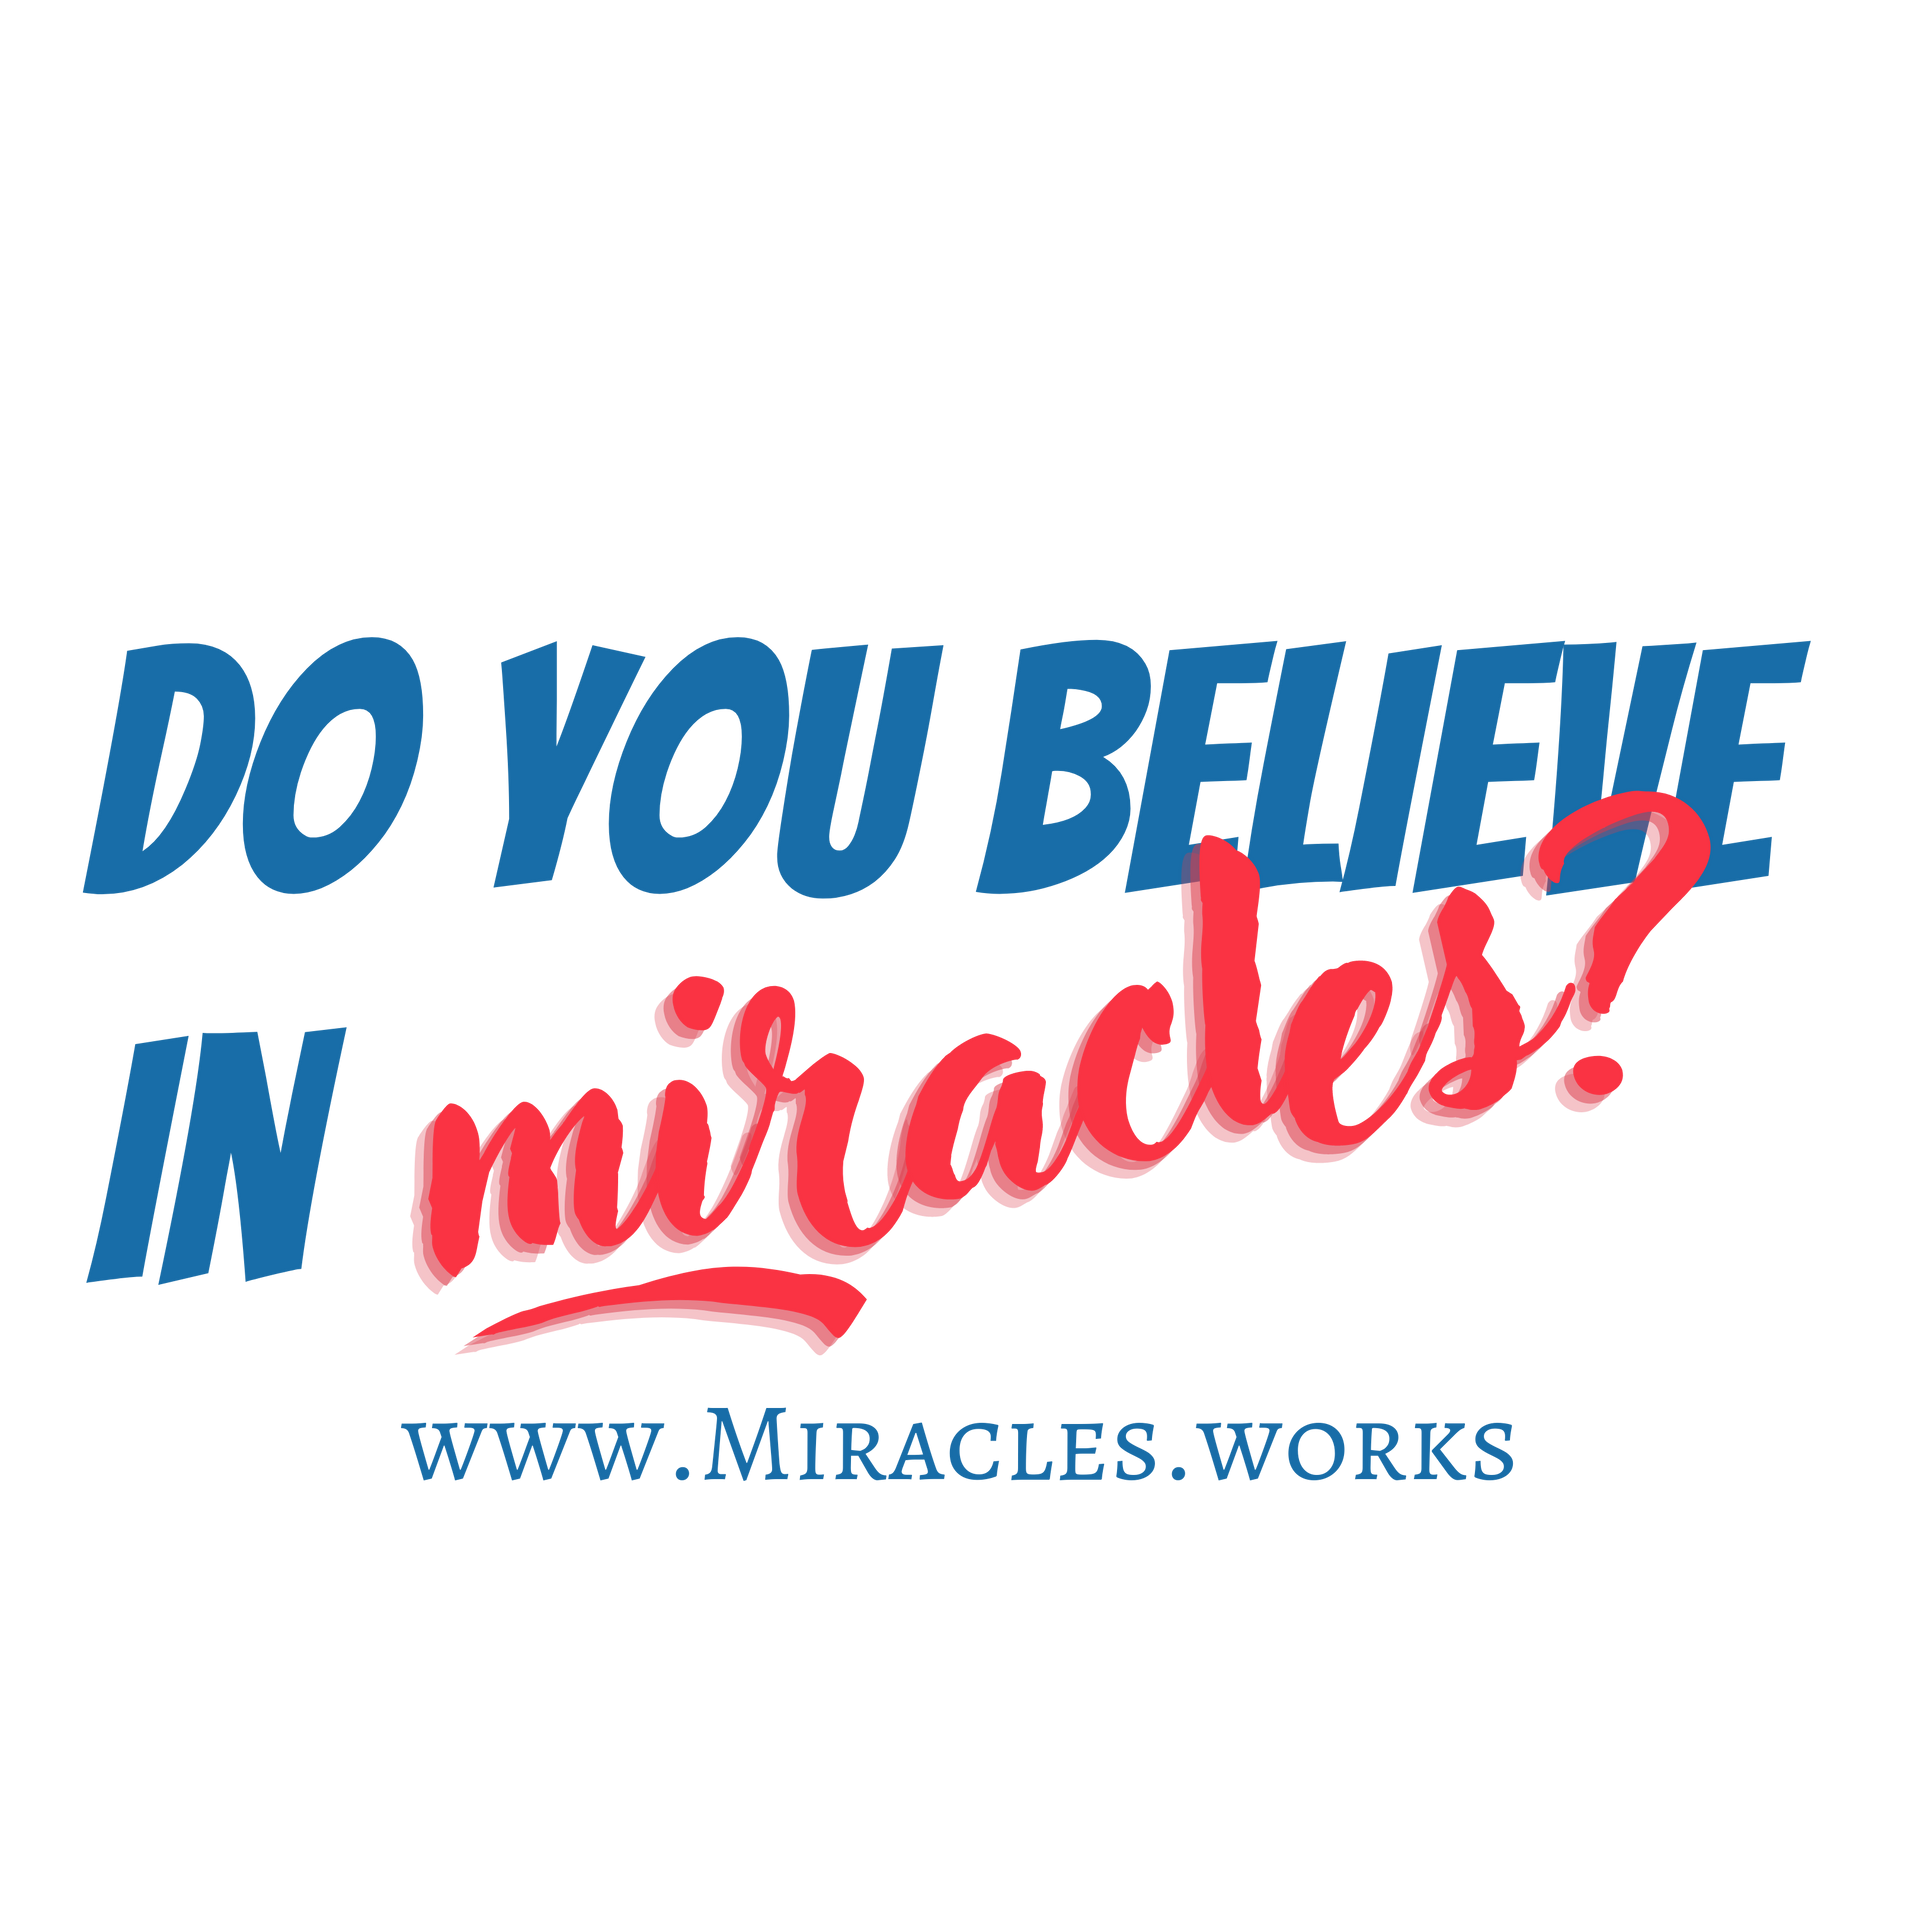 www.miracles.works #MiraclesWorks